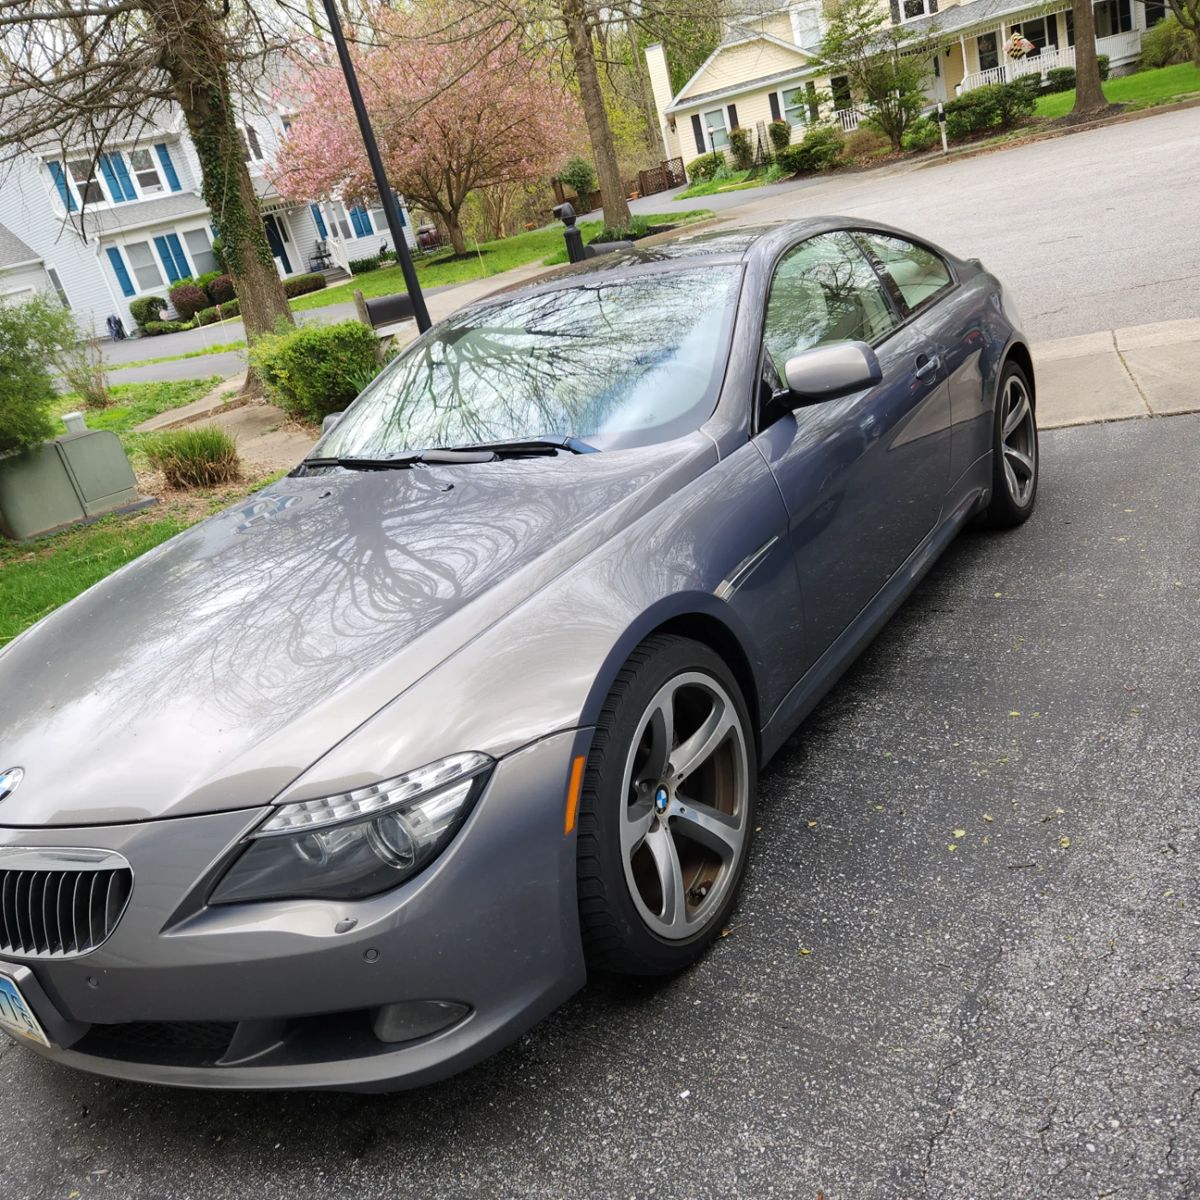 2008 BMW 650i, 2 door coupe, excellent physical condition, 192,200 miles. The car has been Maryland State Inspected and FAILED.  In order to have the car pass inspection & be tagged/driven, the Buyer must pay to have the following repairs completed:
​​​​​​​4 new tires
front & rear brake pads & rotors
repair oil leak on manifold (requires diagnosis & repair)
steering rack and alignment
​​​​​​​** I am receiving all offers for this car, as-is.  Message me directly and I will receive offers, as-is, until Monday April 29.  CASH ONLY, AS-IS. 